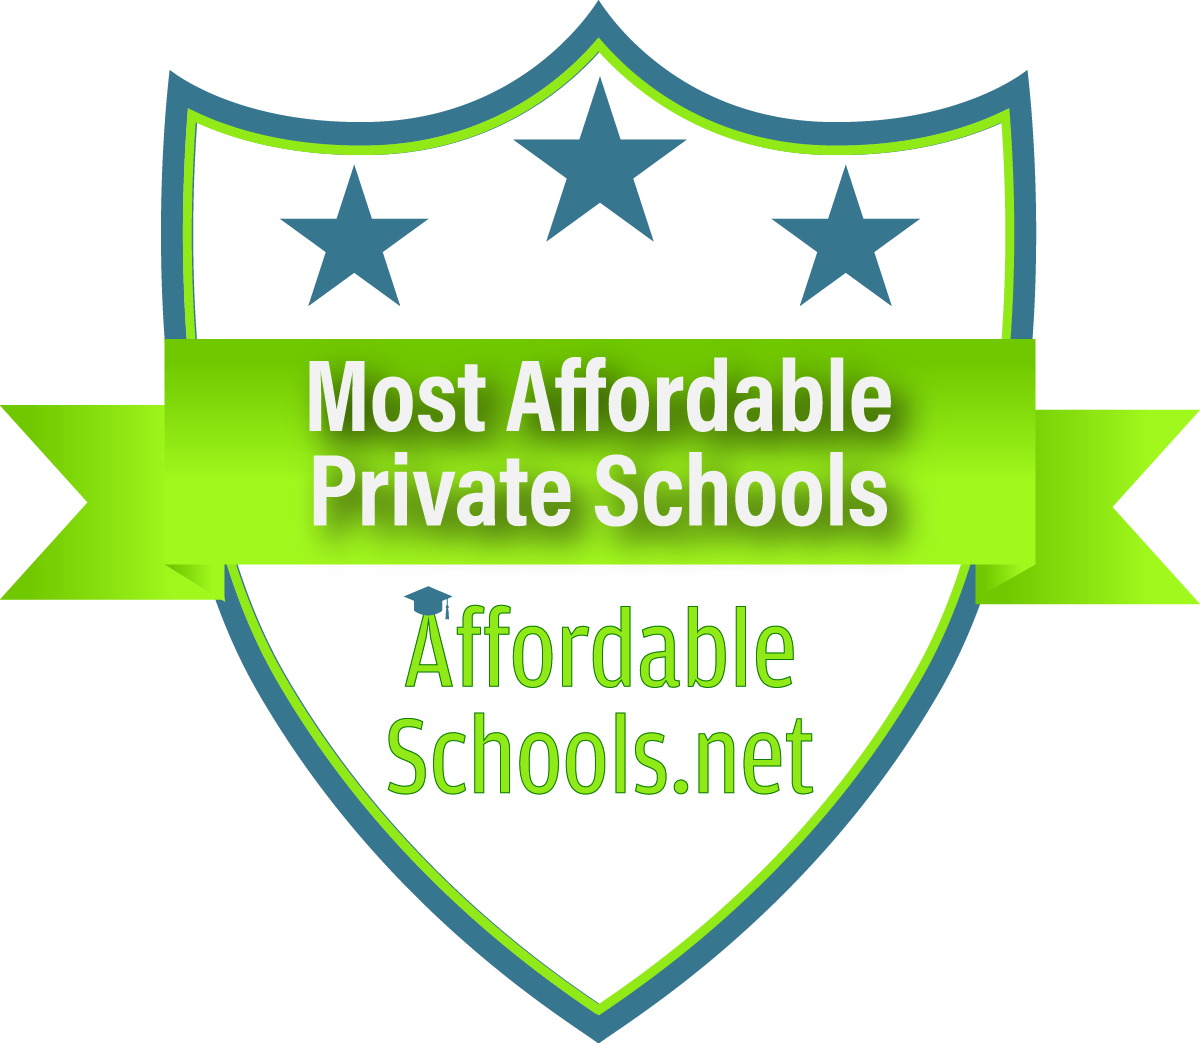 25 Most Affordable Large Private Nonprofit Bachelors - 